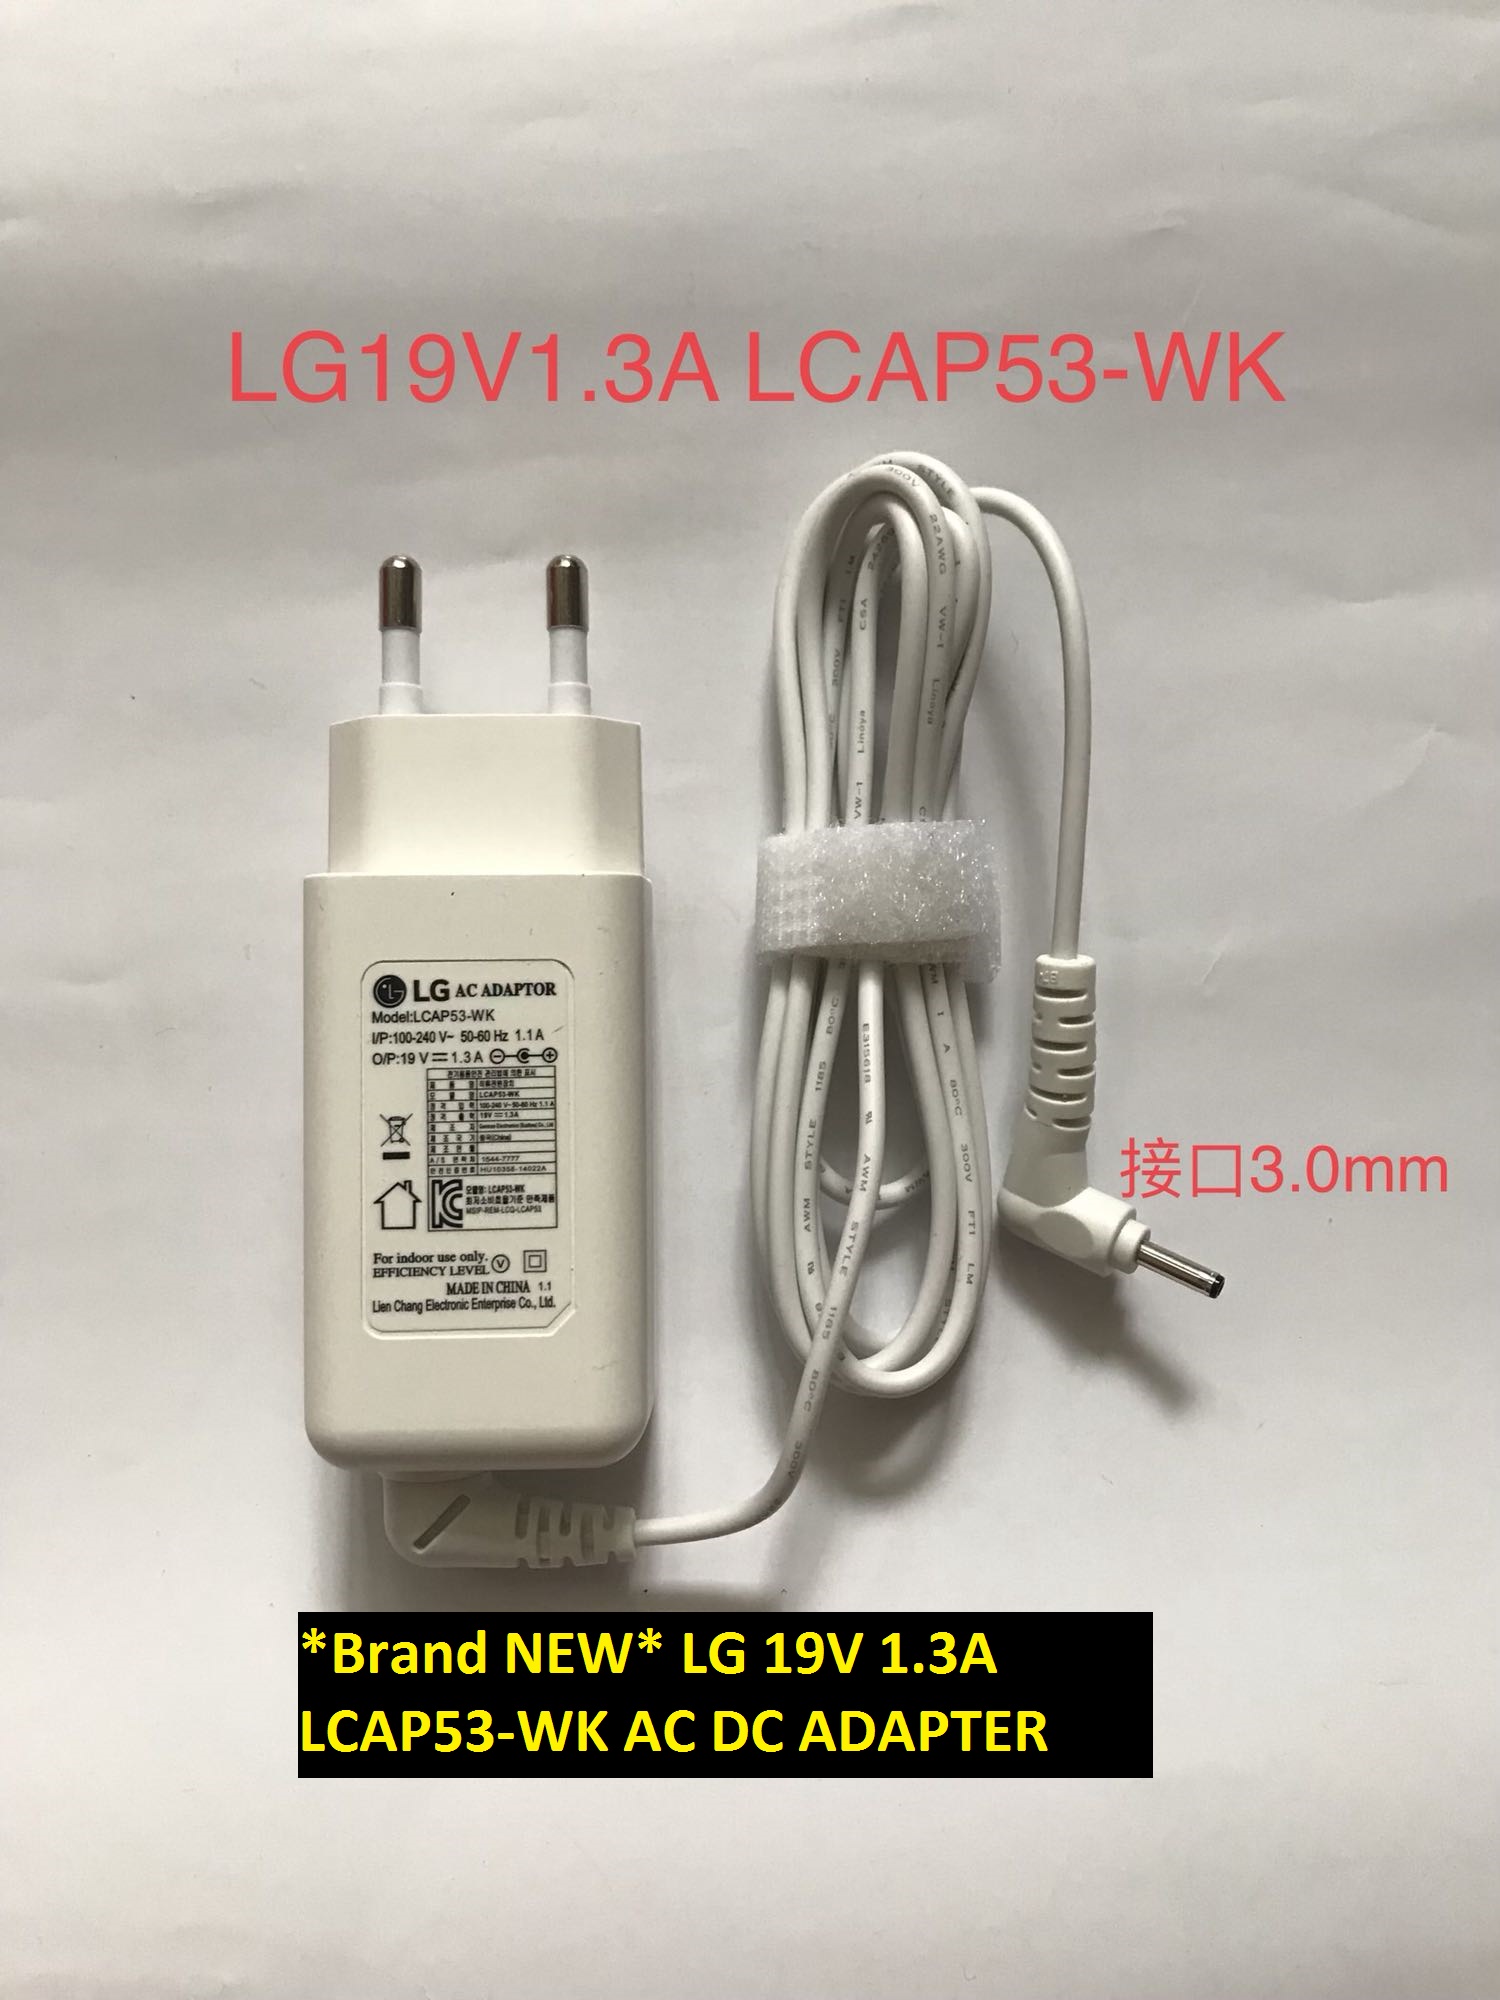 *Brand NEW* AC100-240V LCAP53-WK LG 19V 1.3A AC DC ADAPTER POWER SUPPLY - Click Image to Close